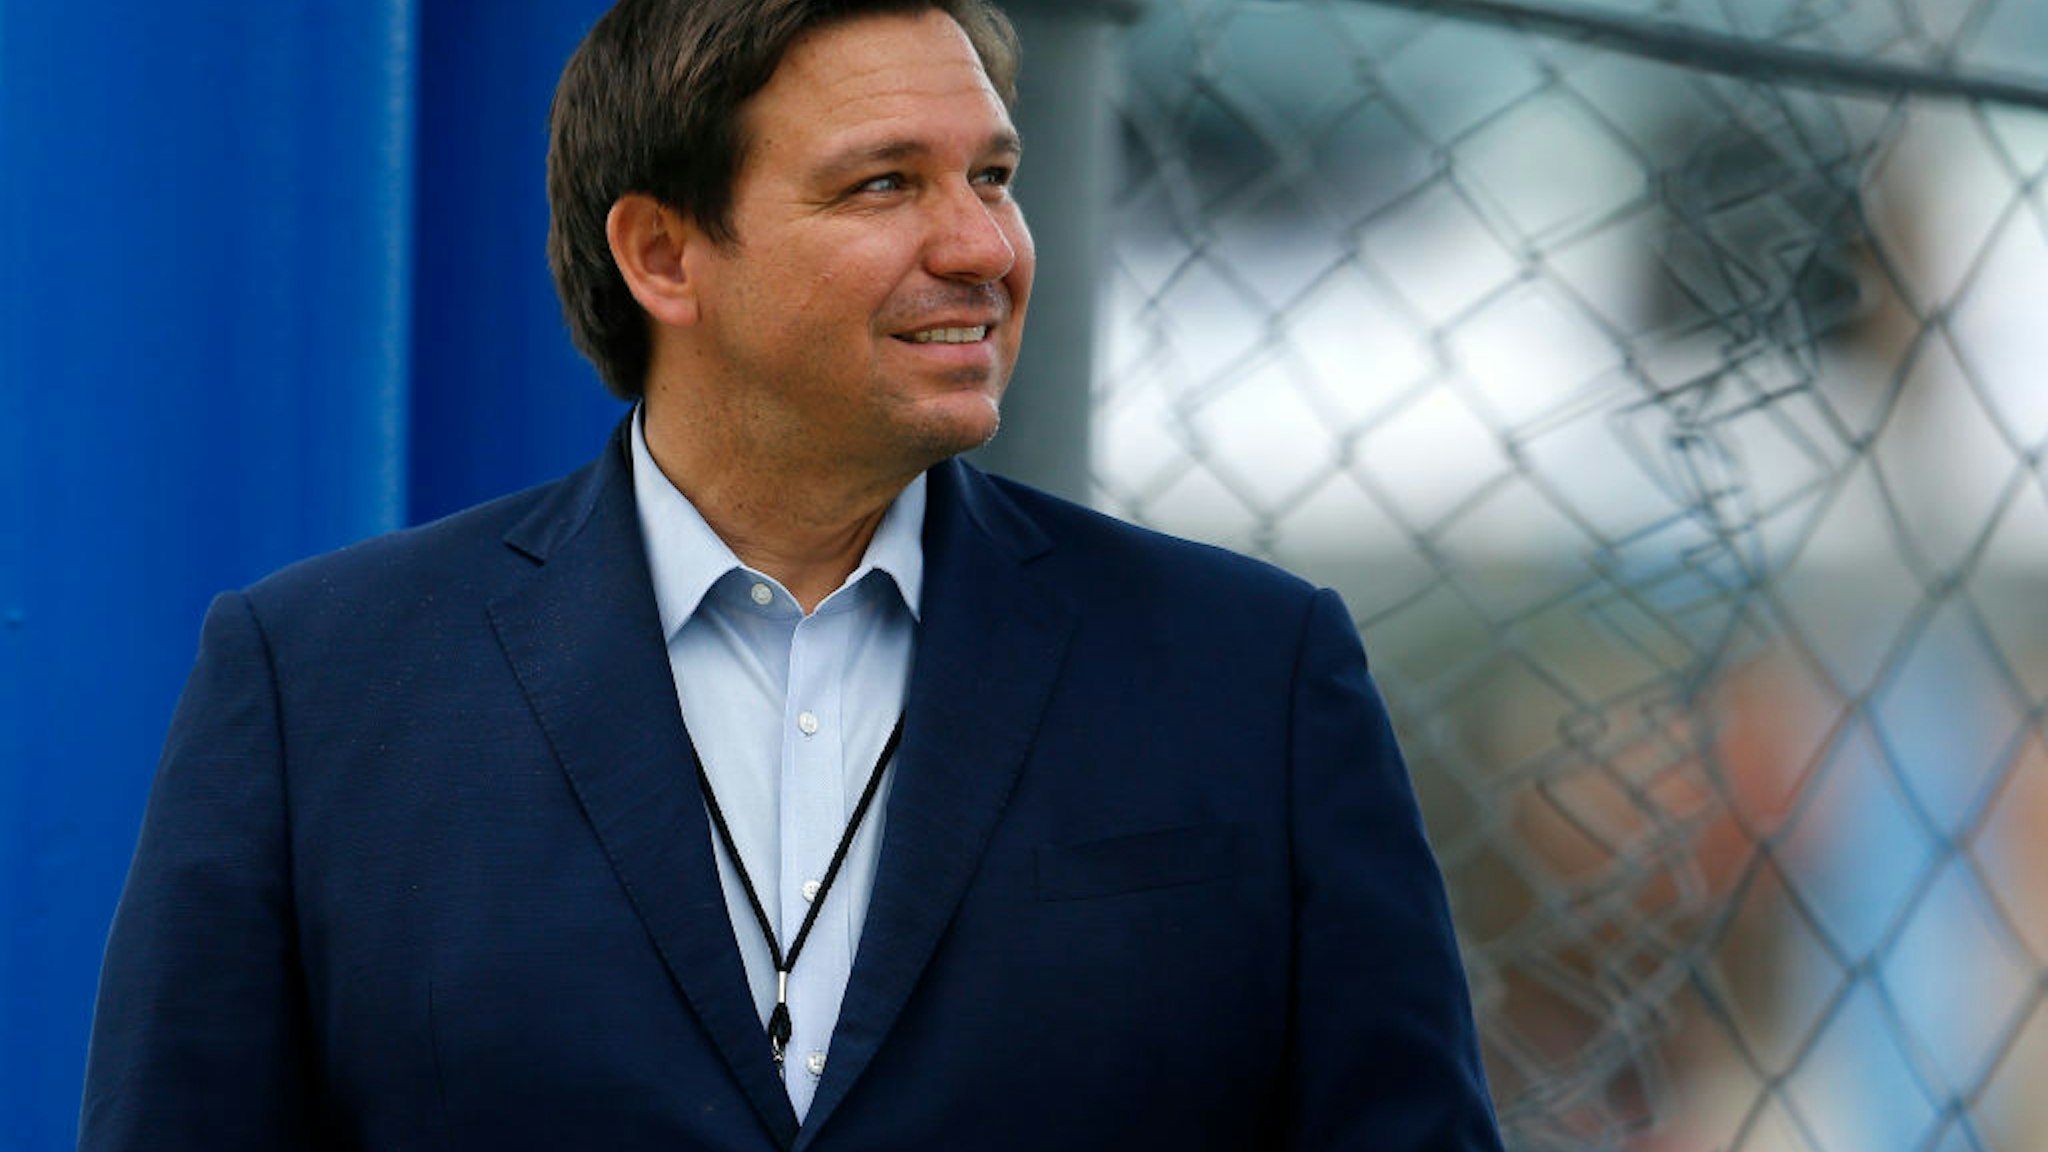 Florida Governor Ron DeSantis looks on prior to the NASCAR Cup Series Dixie Vodka 400 at Homestead-Miami Speedway on June 14, 2020 in Homestead, Florida.